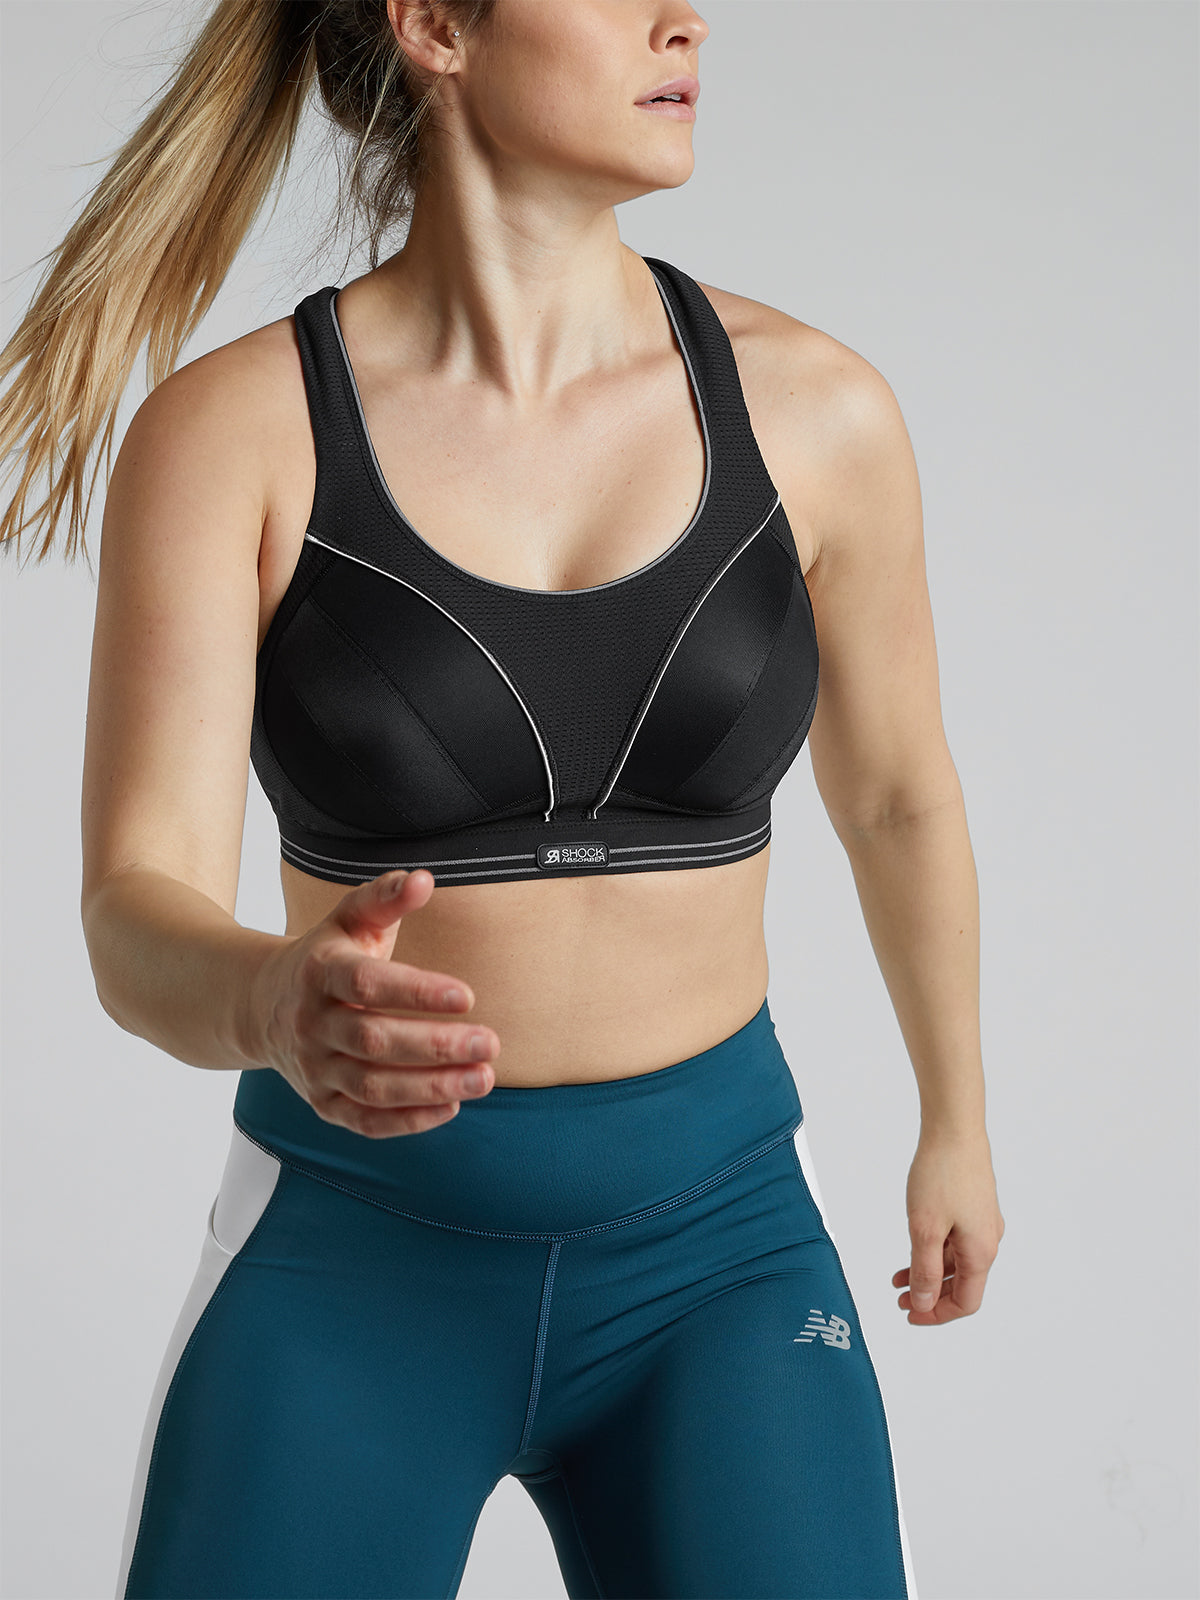 3 Reasons You Should Invest In Better Sports Bras